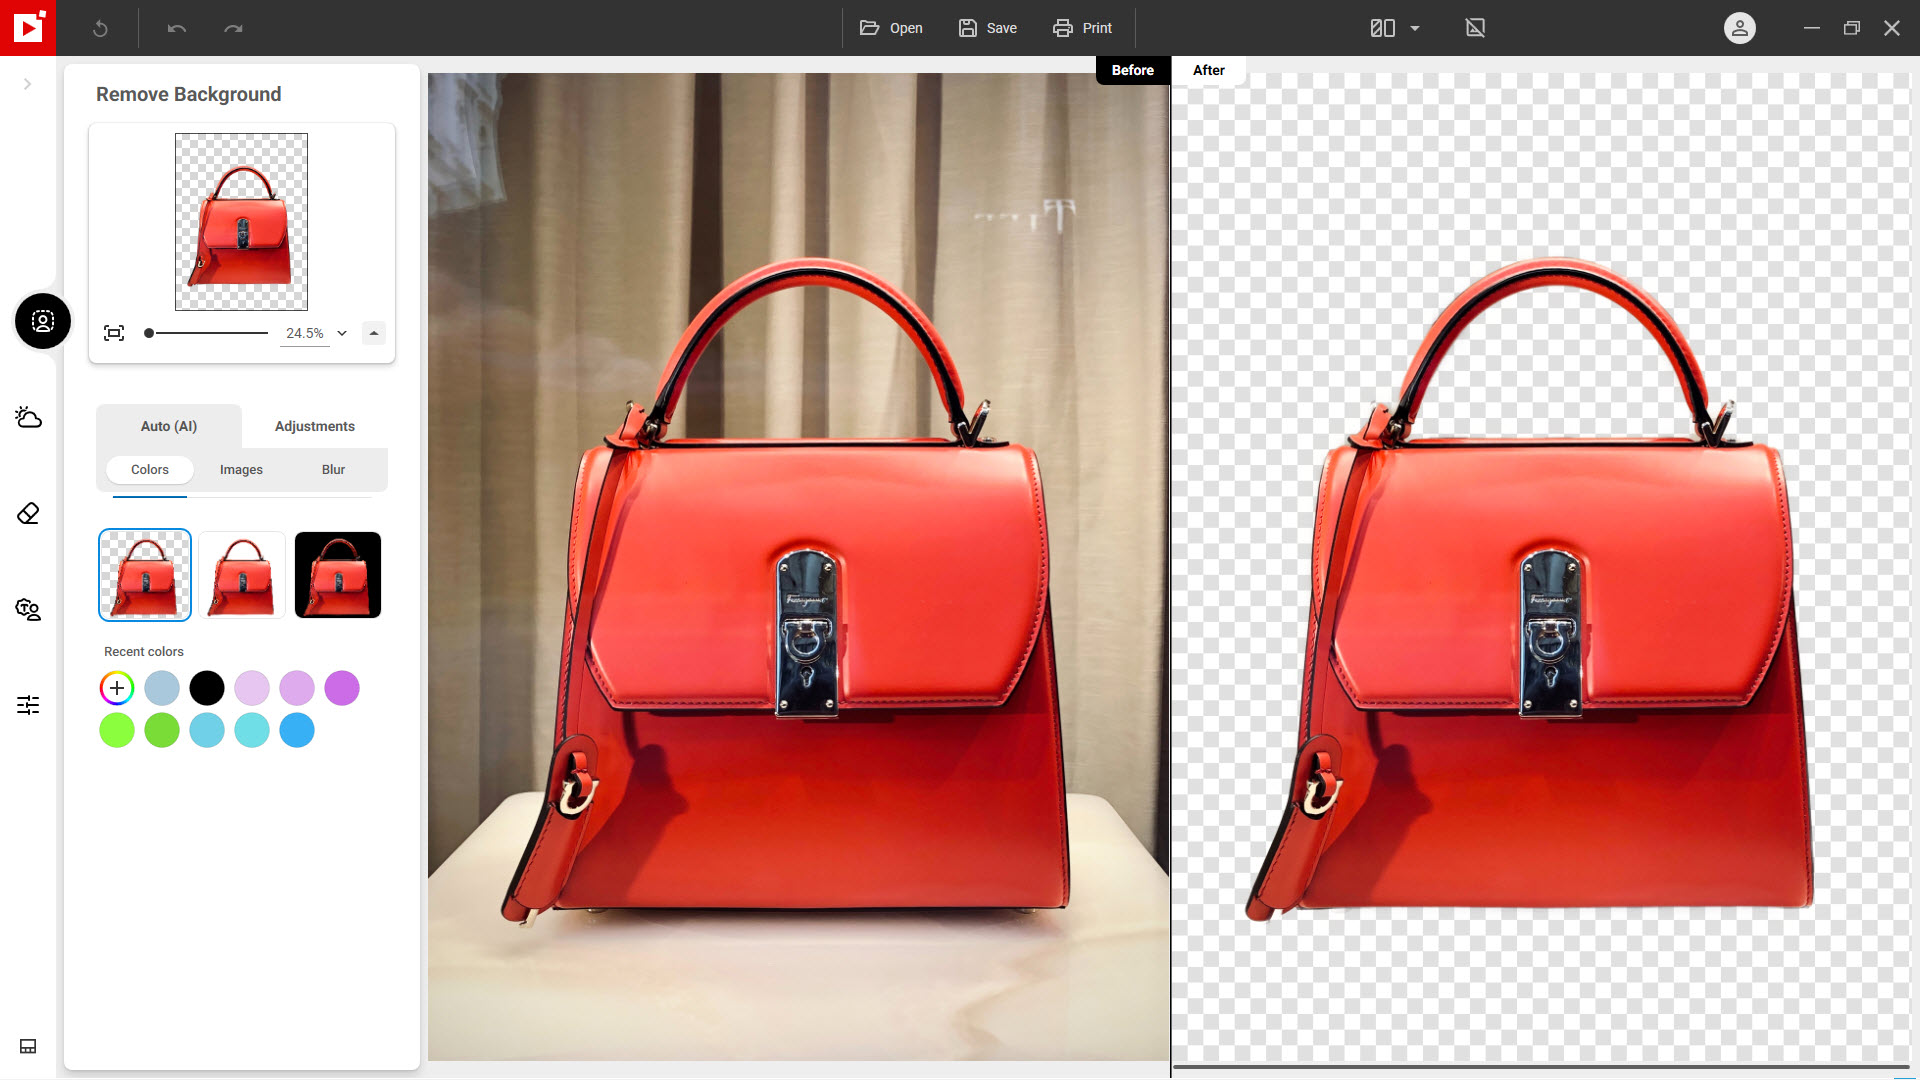 Red handbag before and after background removal